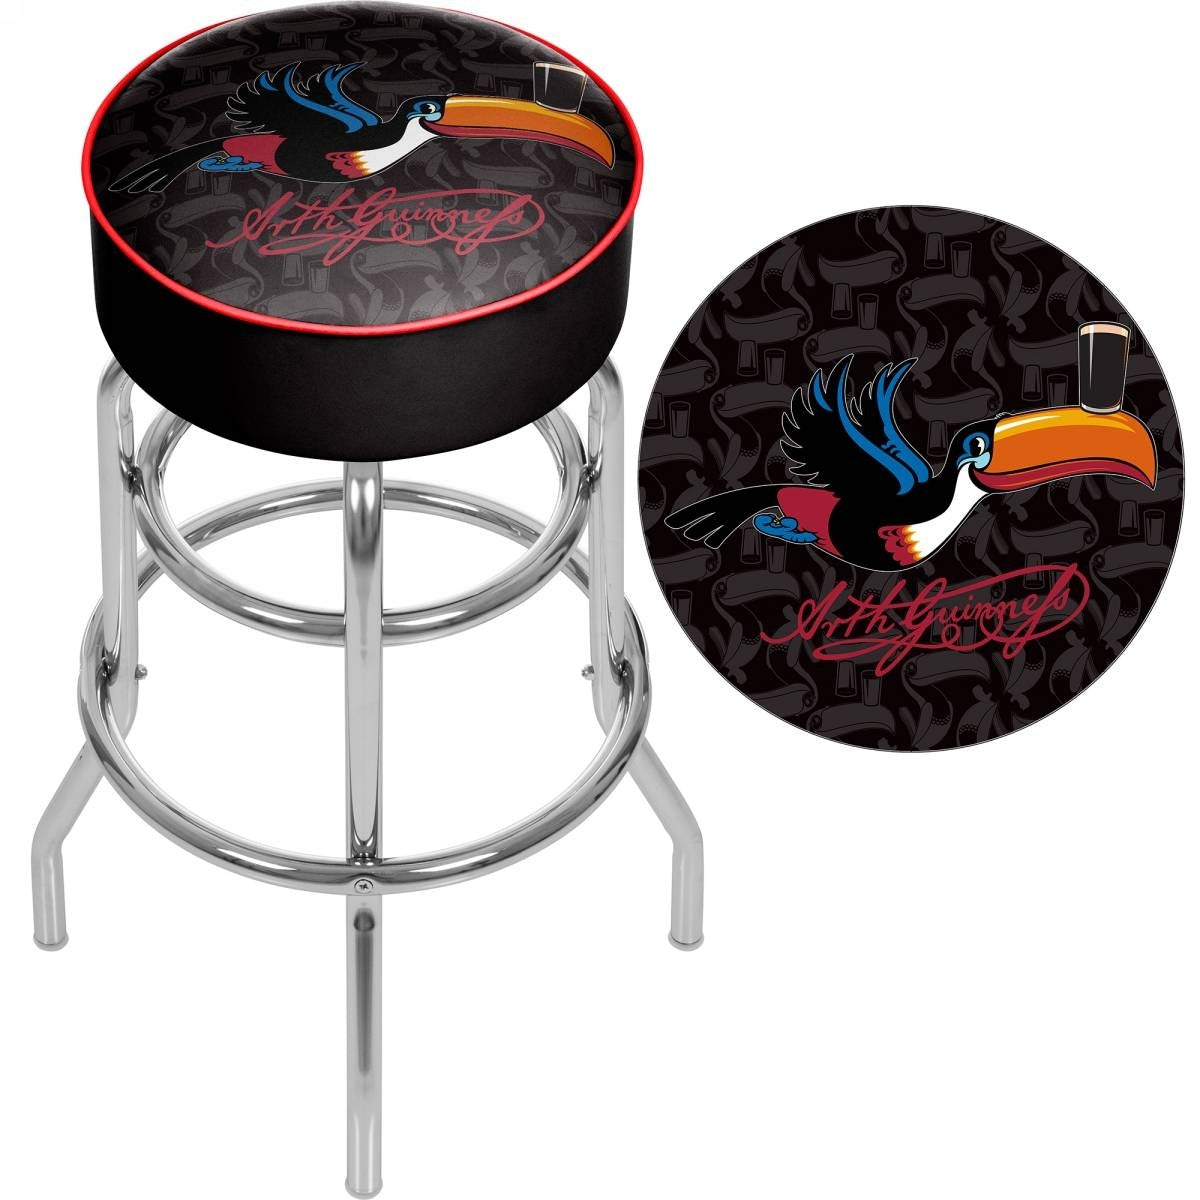 An officially licensed Guinness Padded Swivel Bar Stool - Toucan with a toucan on it.